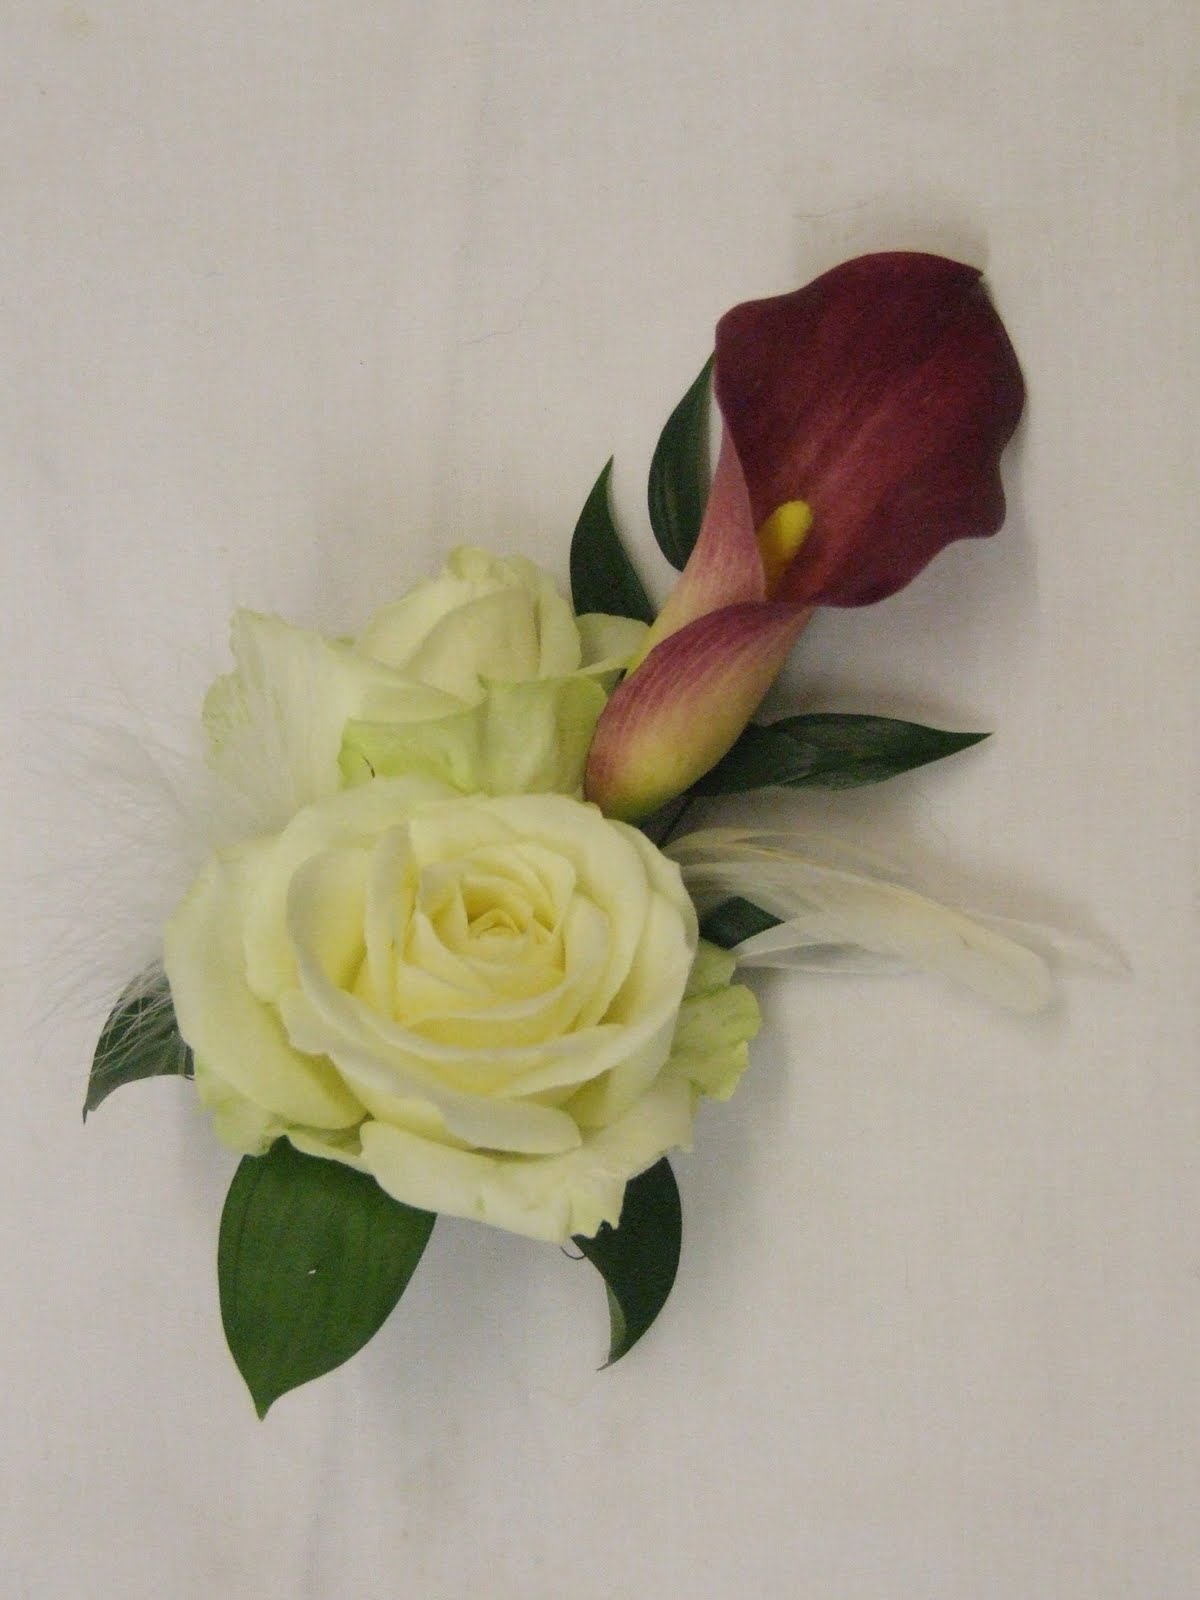 Cheap Wedding Decoration Ideas wedding flowers hand corsages calla lily